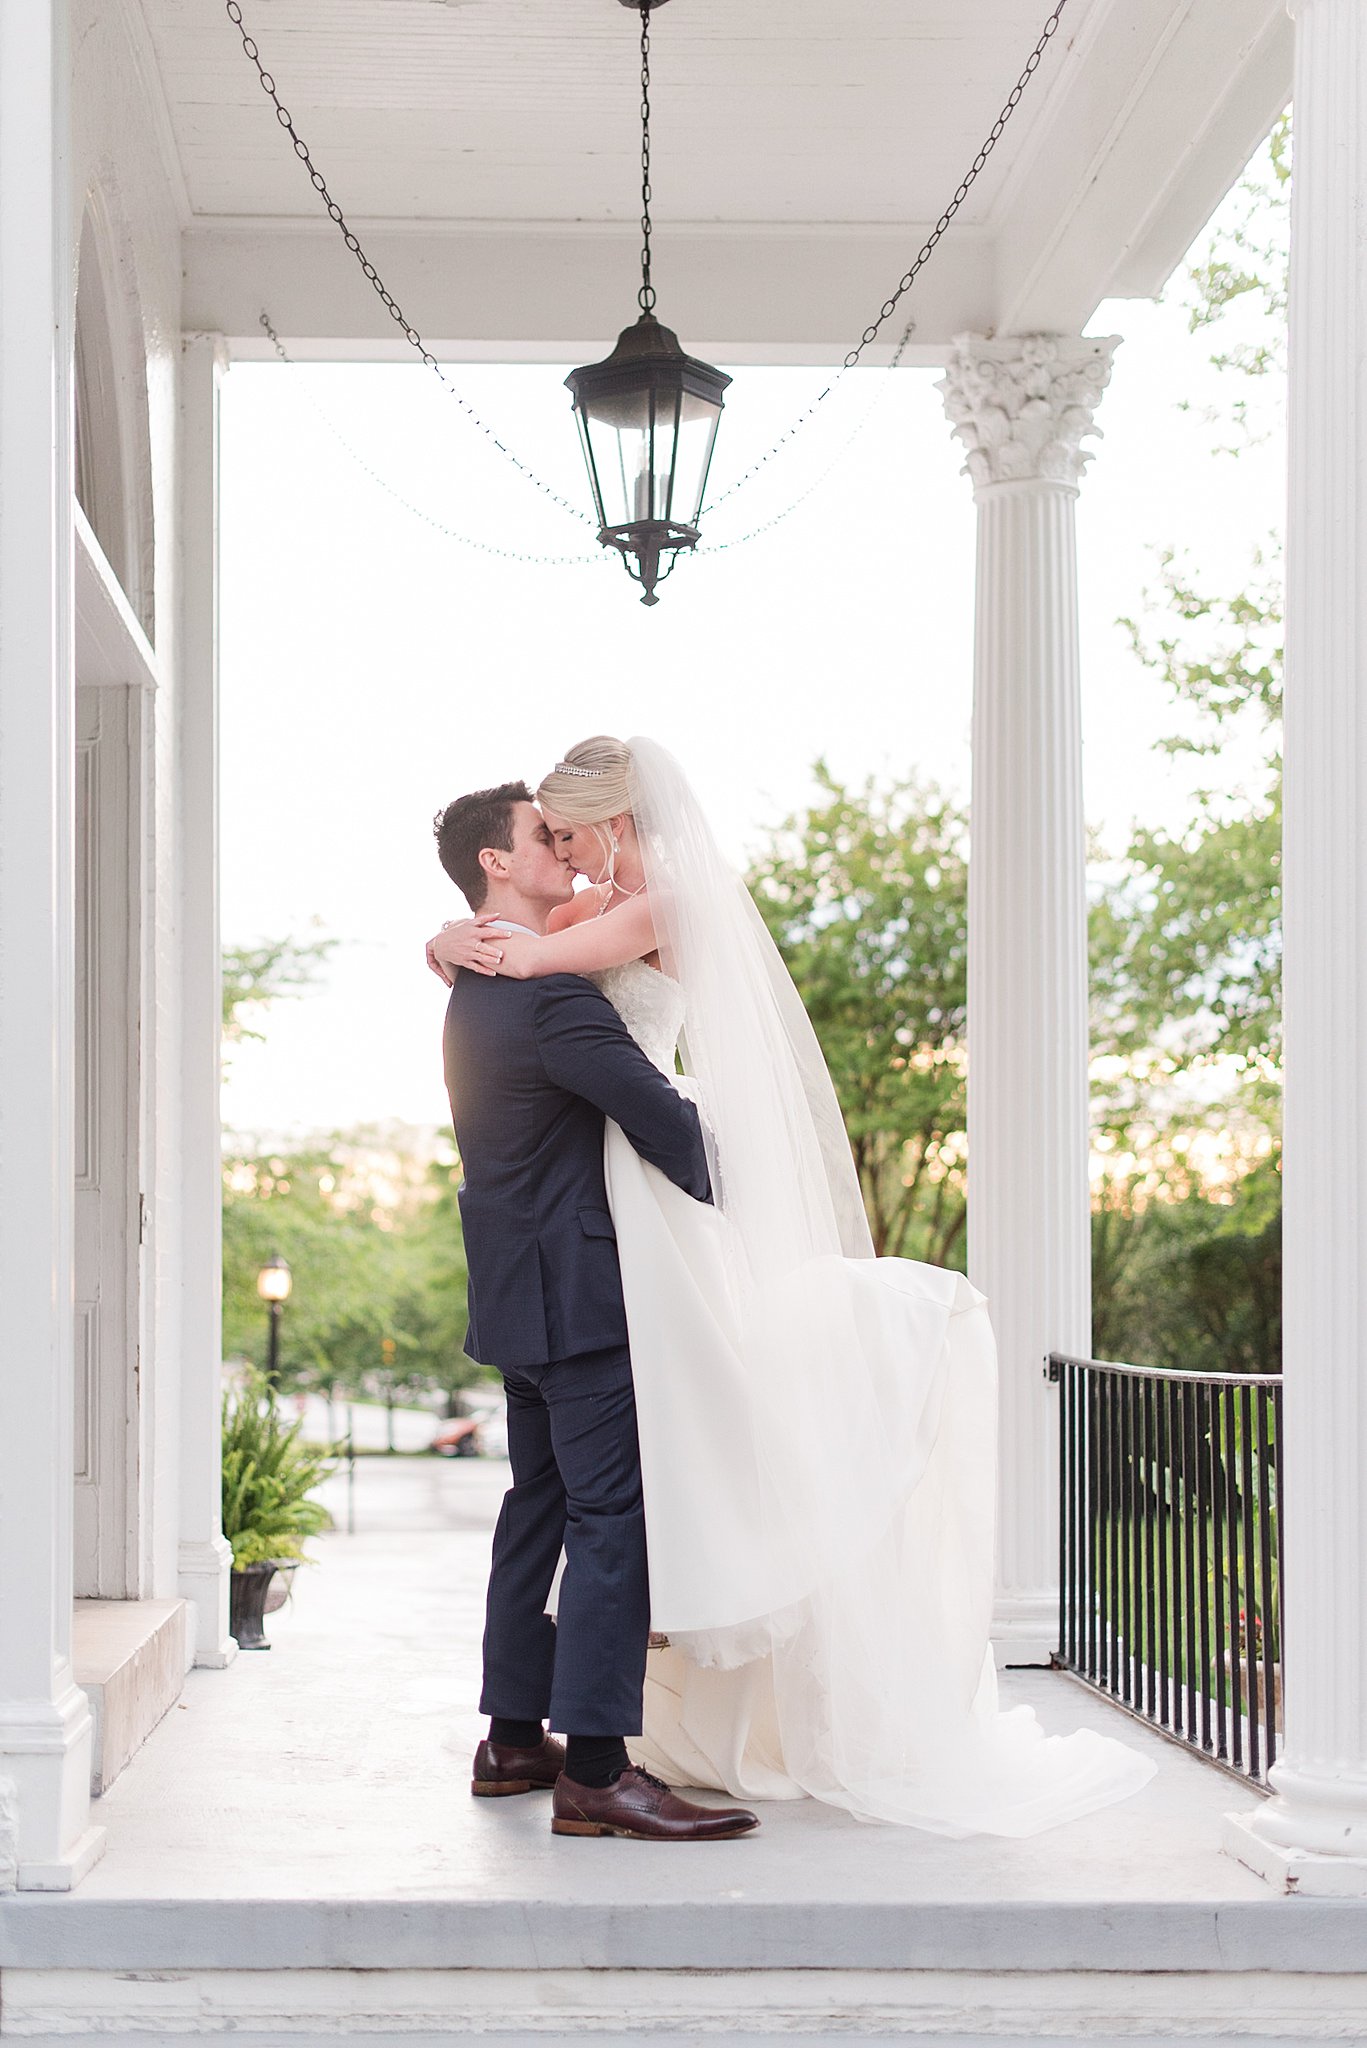 A groom lifts his bride for a kiss while standing on a porch at sunset after using wedding planners Baltimore, MD